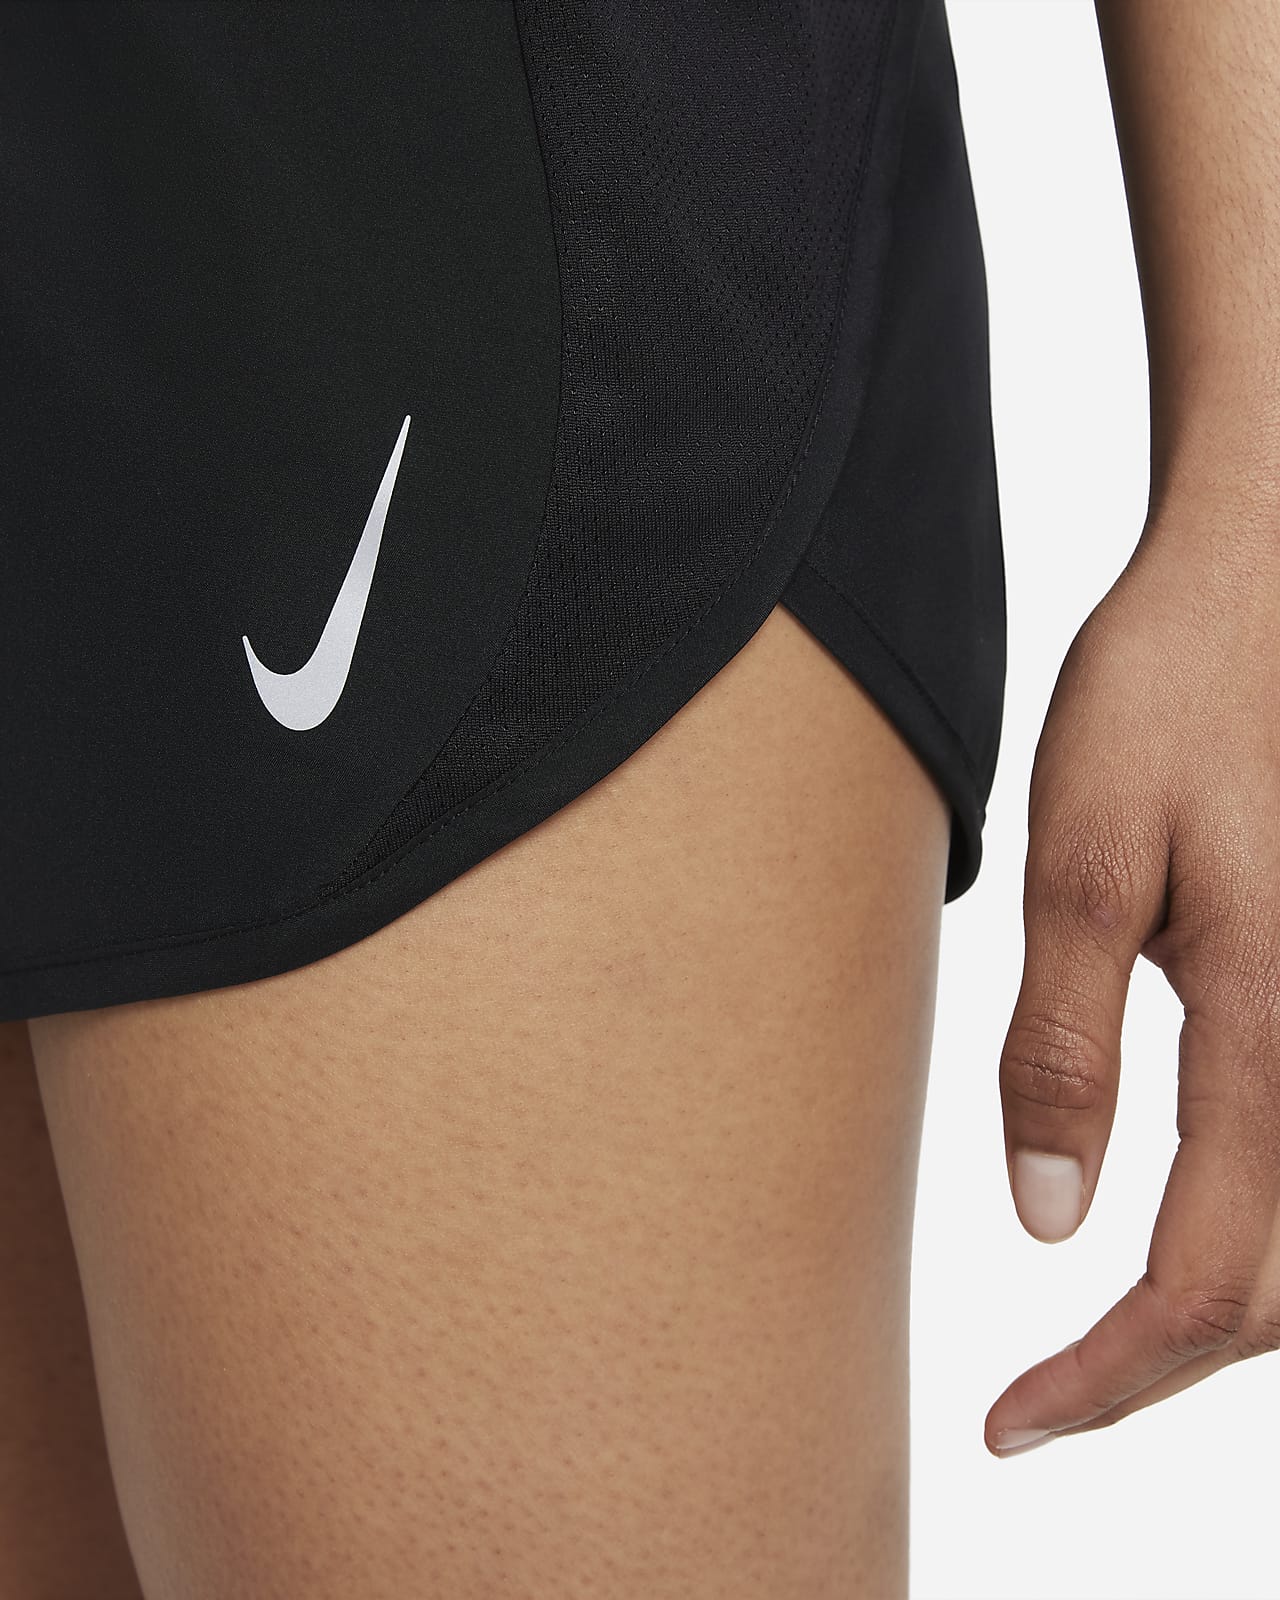 Nike Running extra small dry fit spandex shorts women